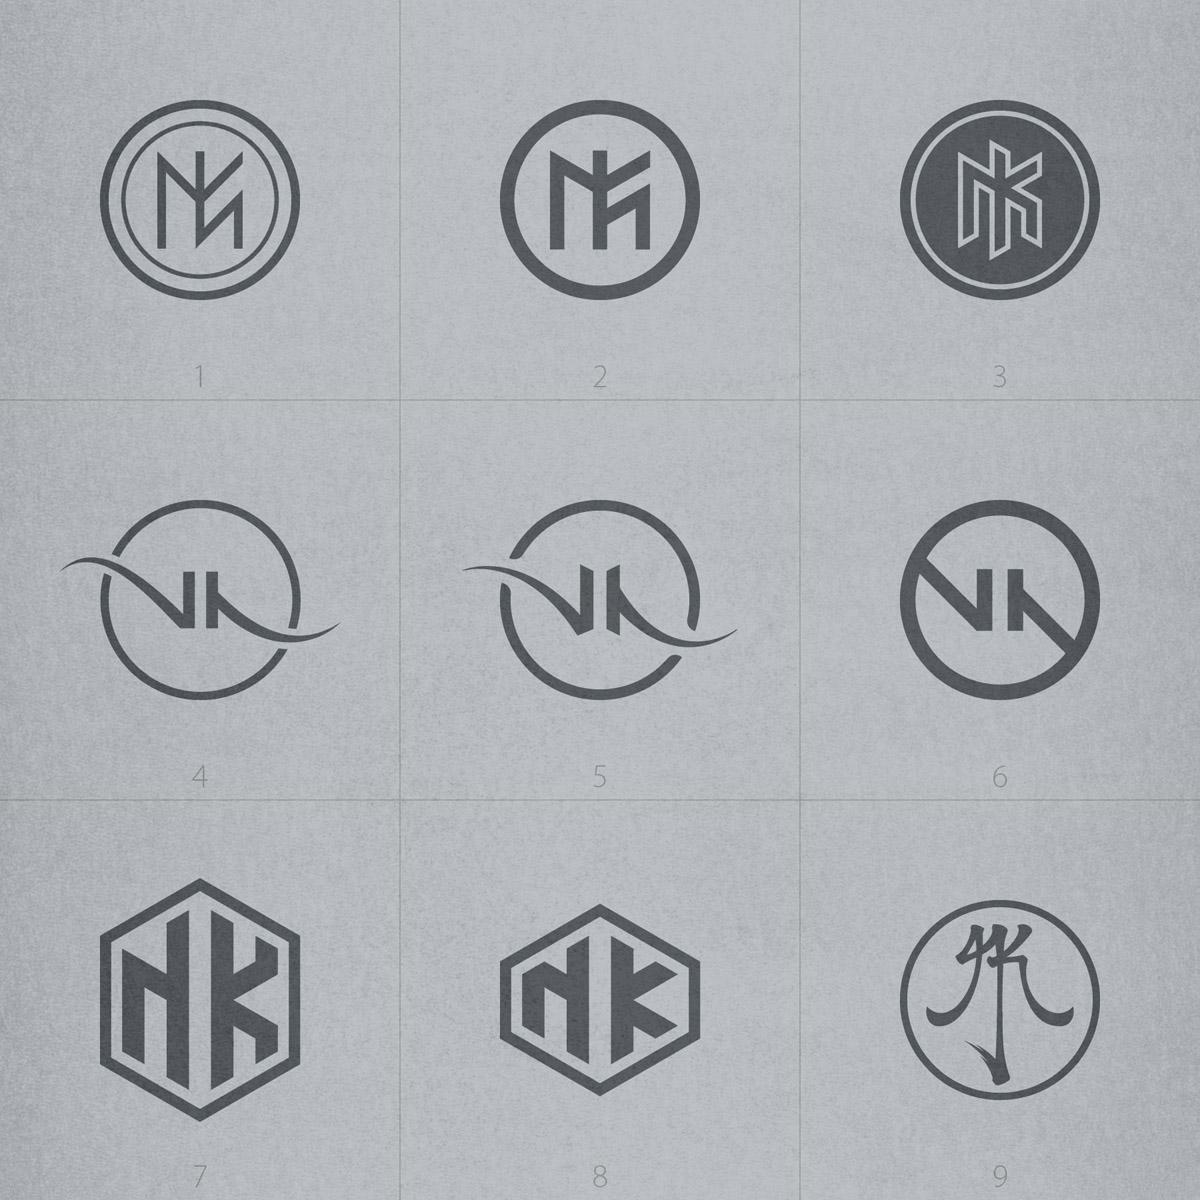 Nk Logo - Personal lettermark logo concepts using my initials 